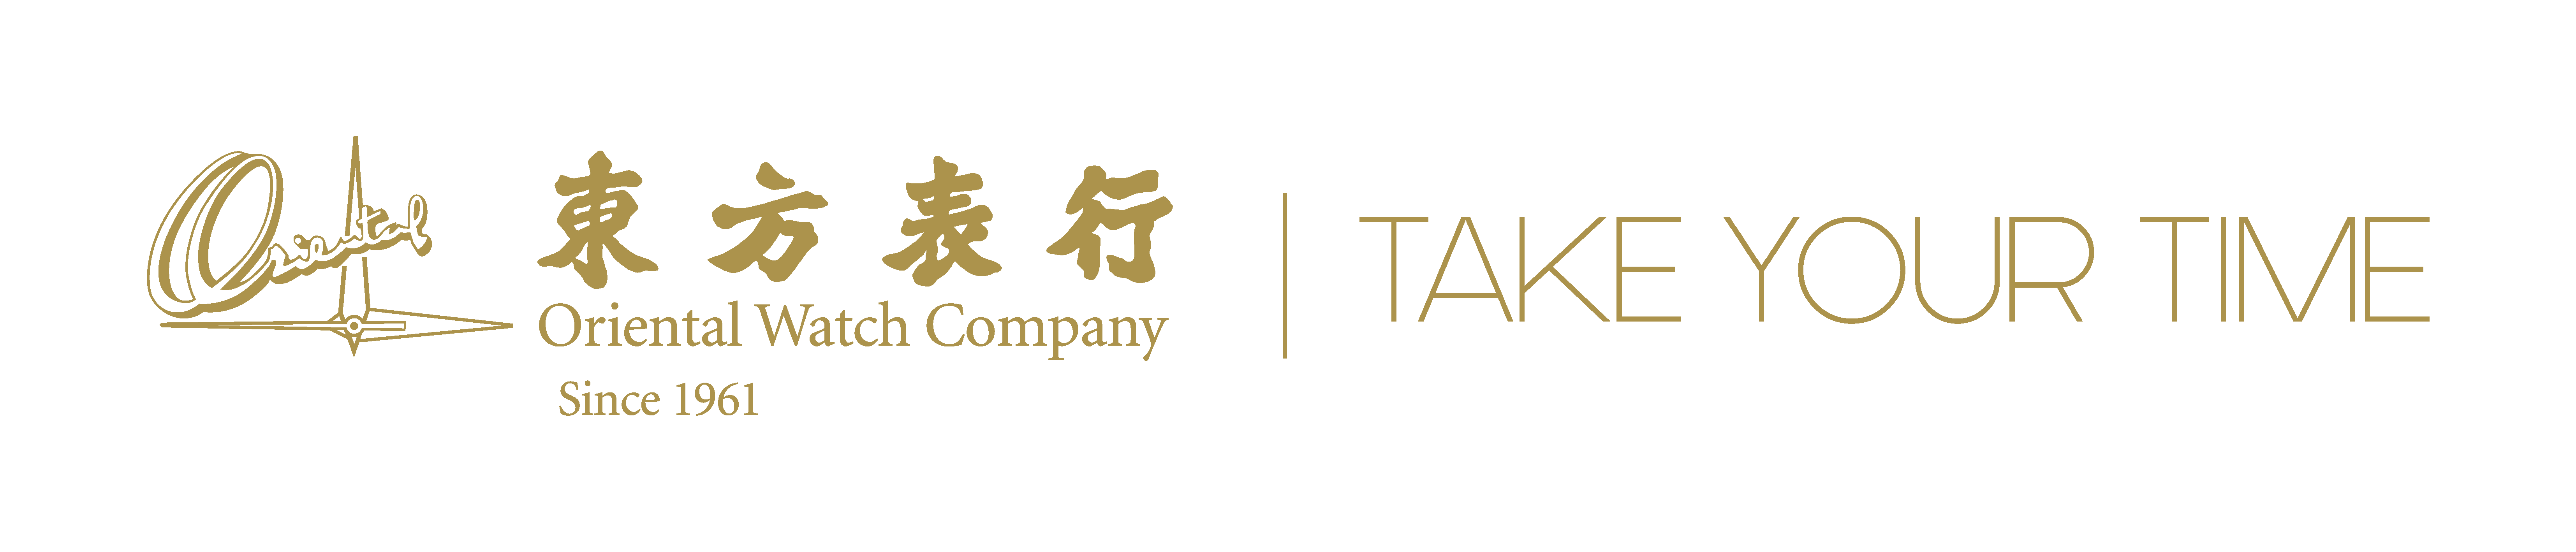 Take Your Time - Oriental Watch Company